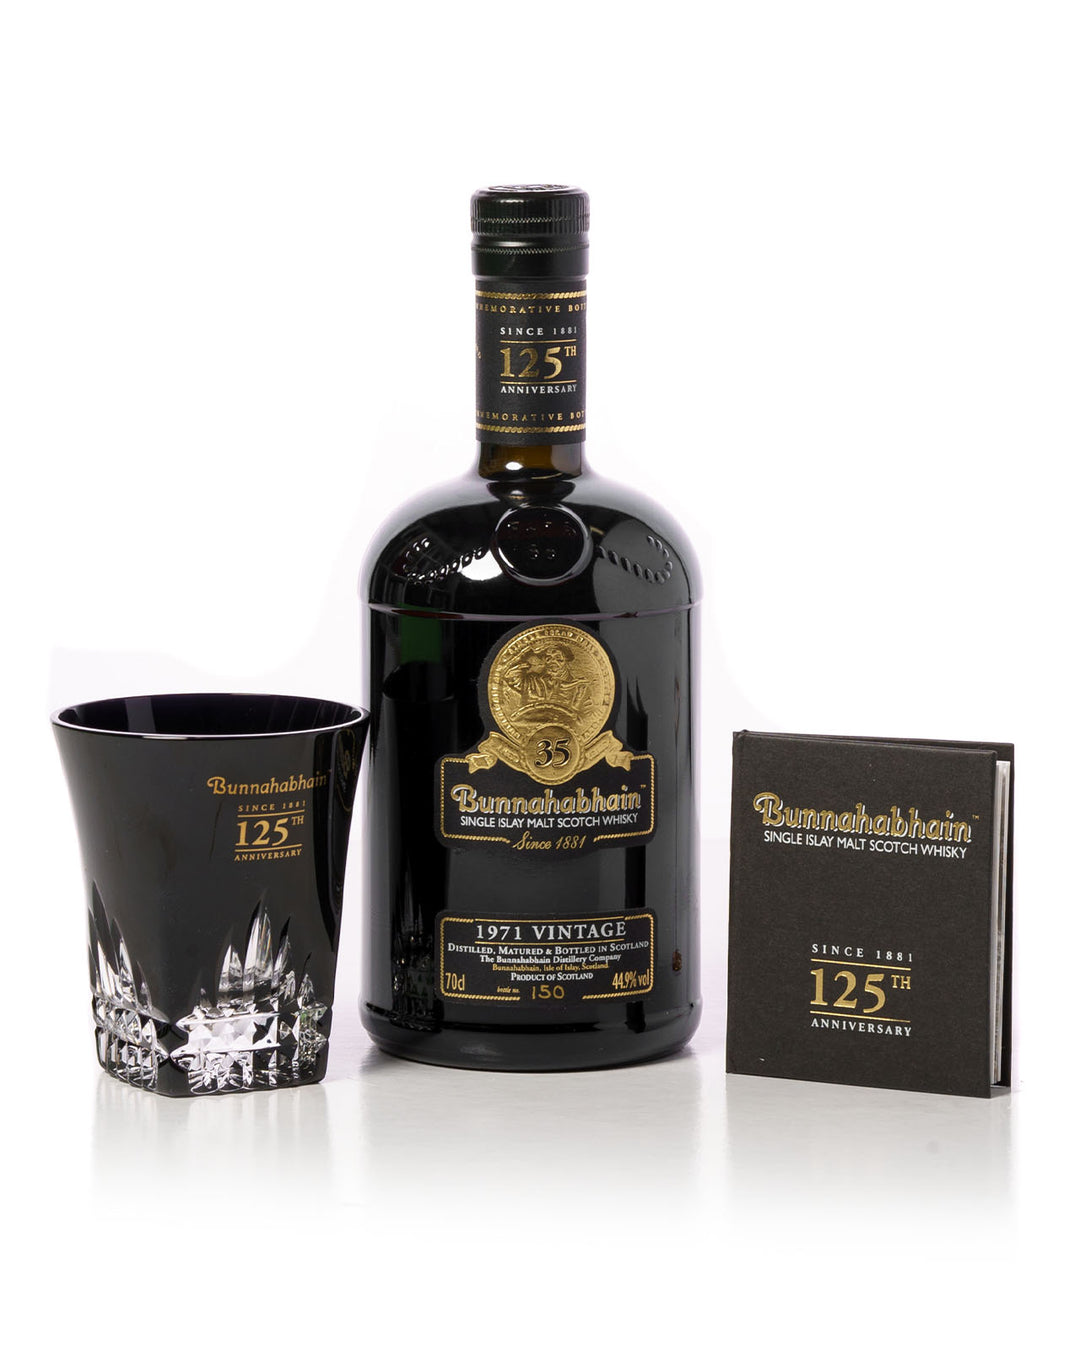 Bunnahabhain 1971 35 Year Old 125th Anniversary Bottled 2006 With Original Box and Glass